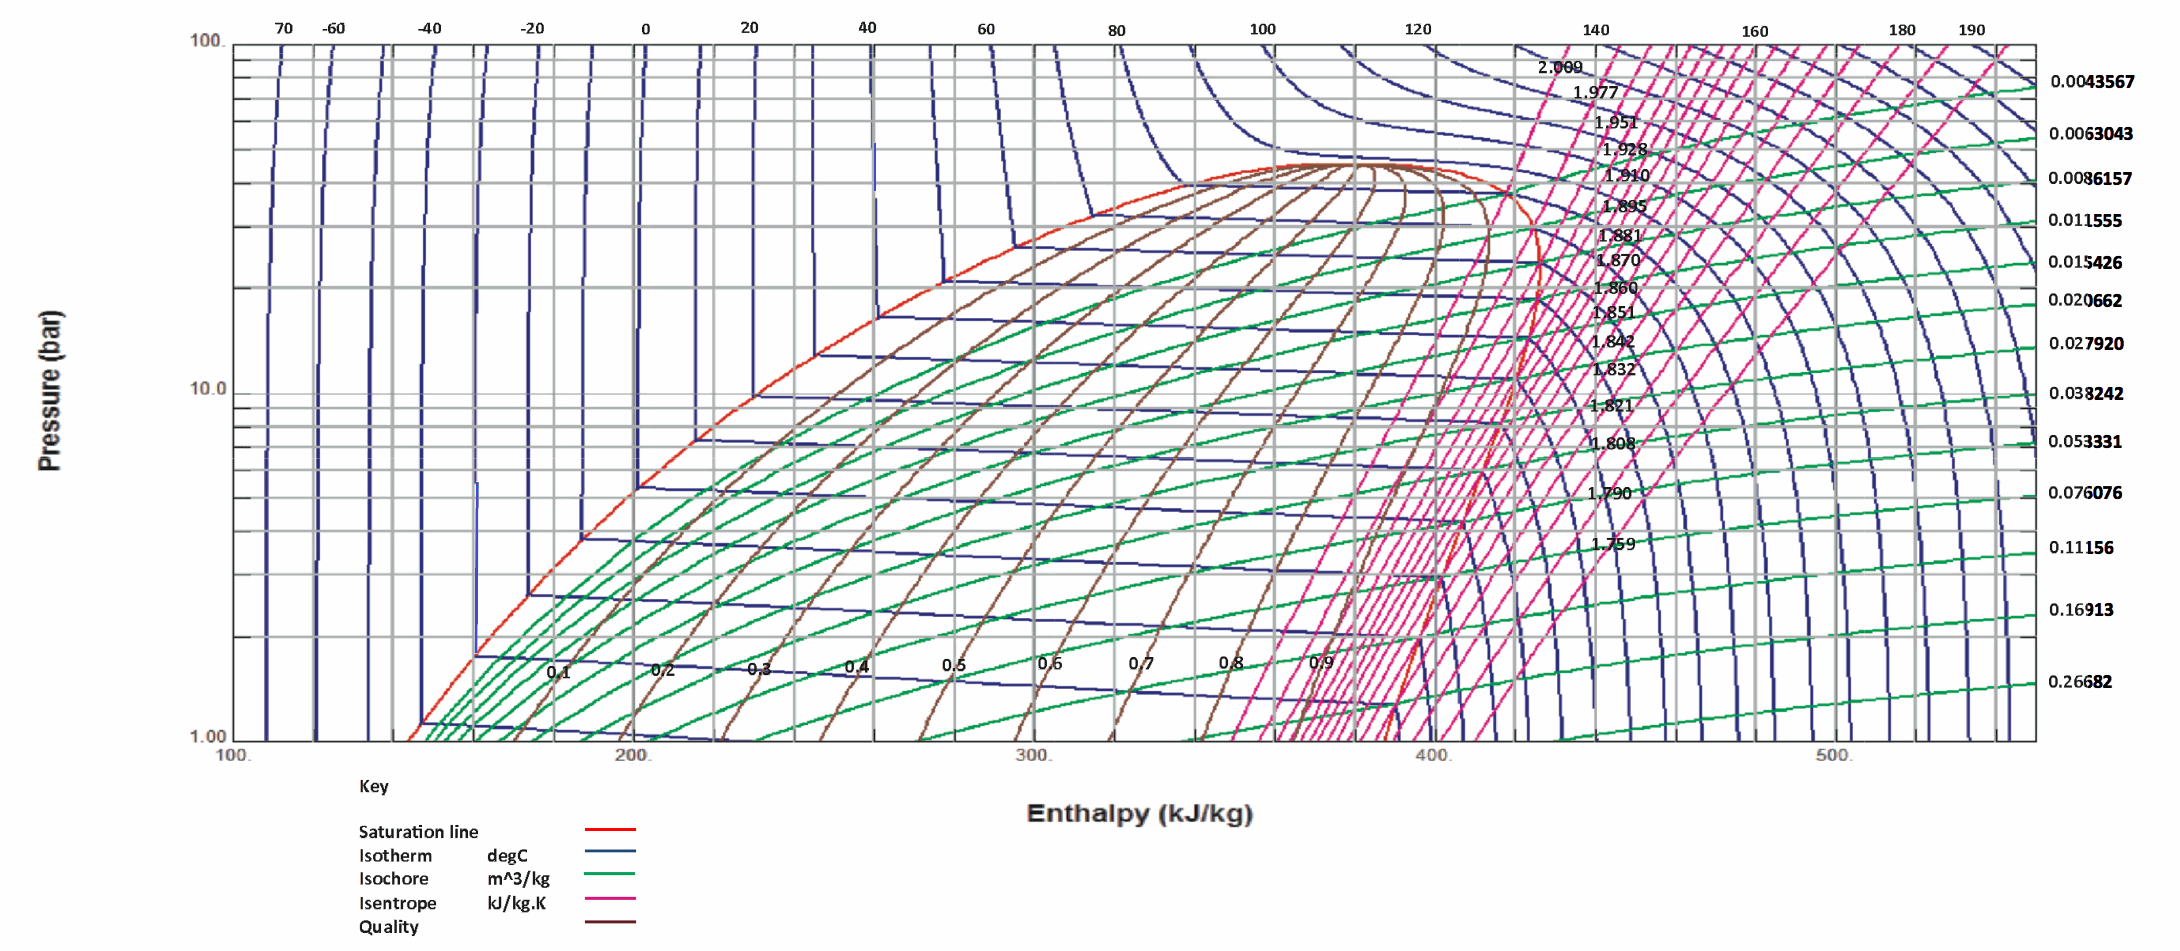 R22 Boiling Point Chart